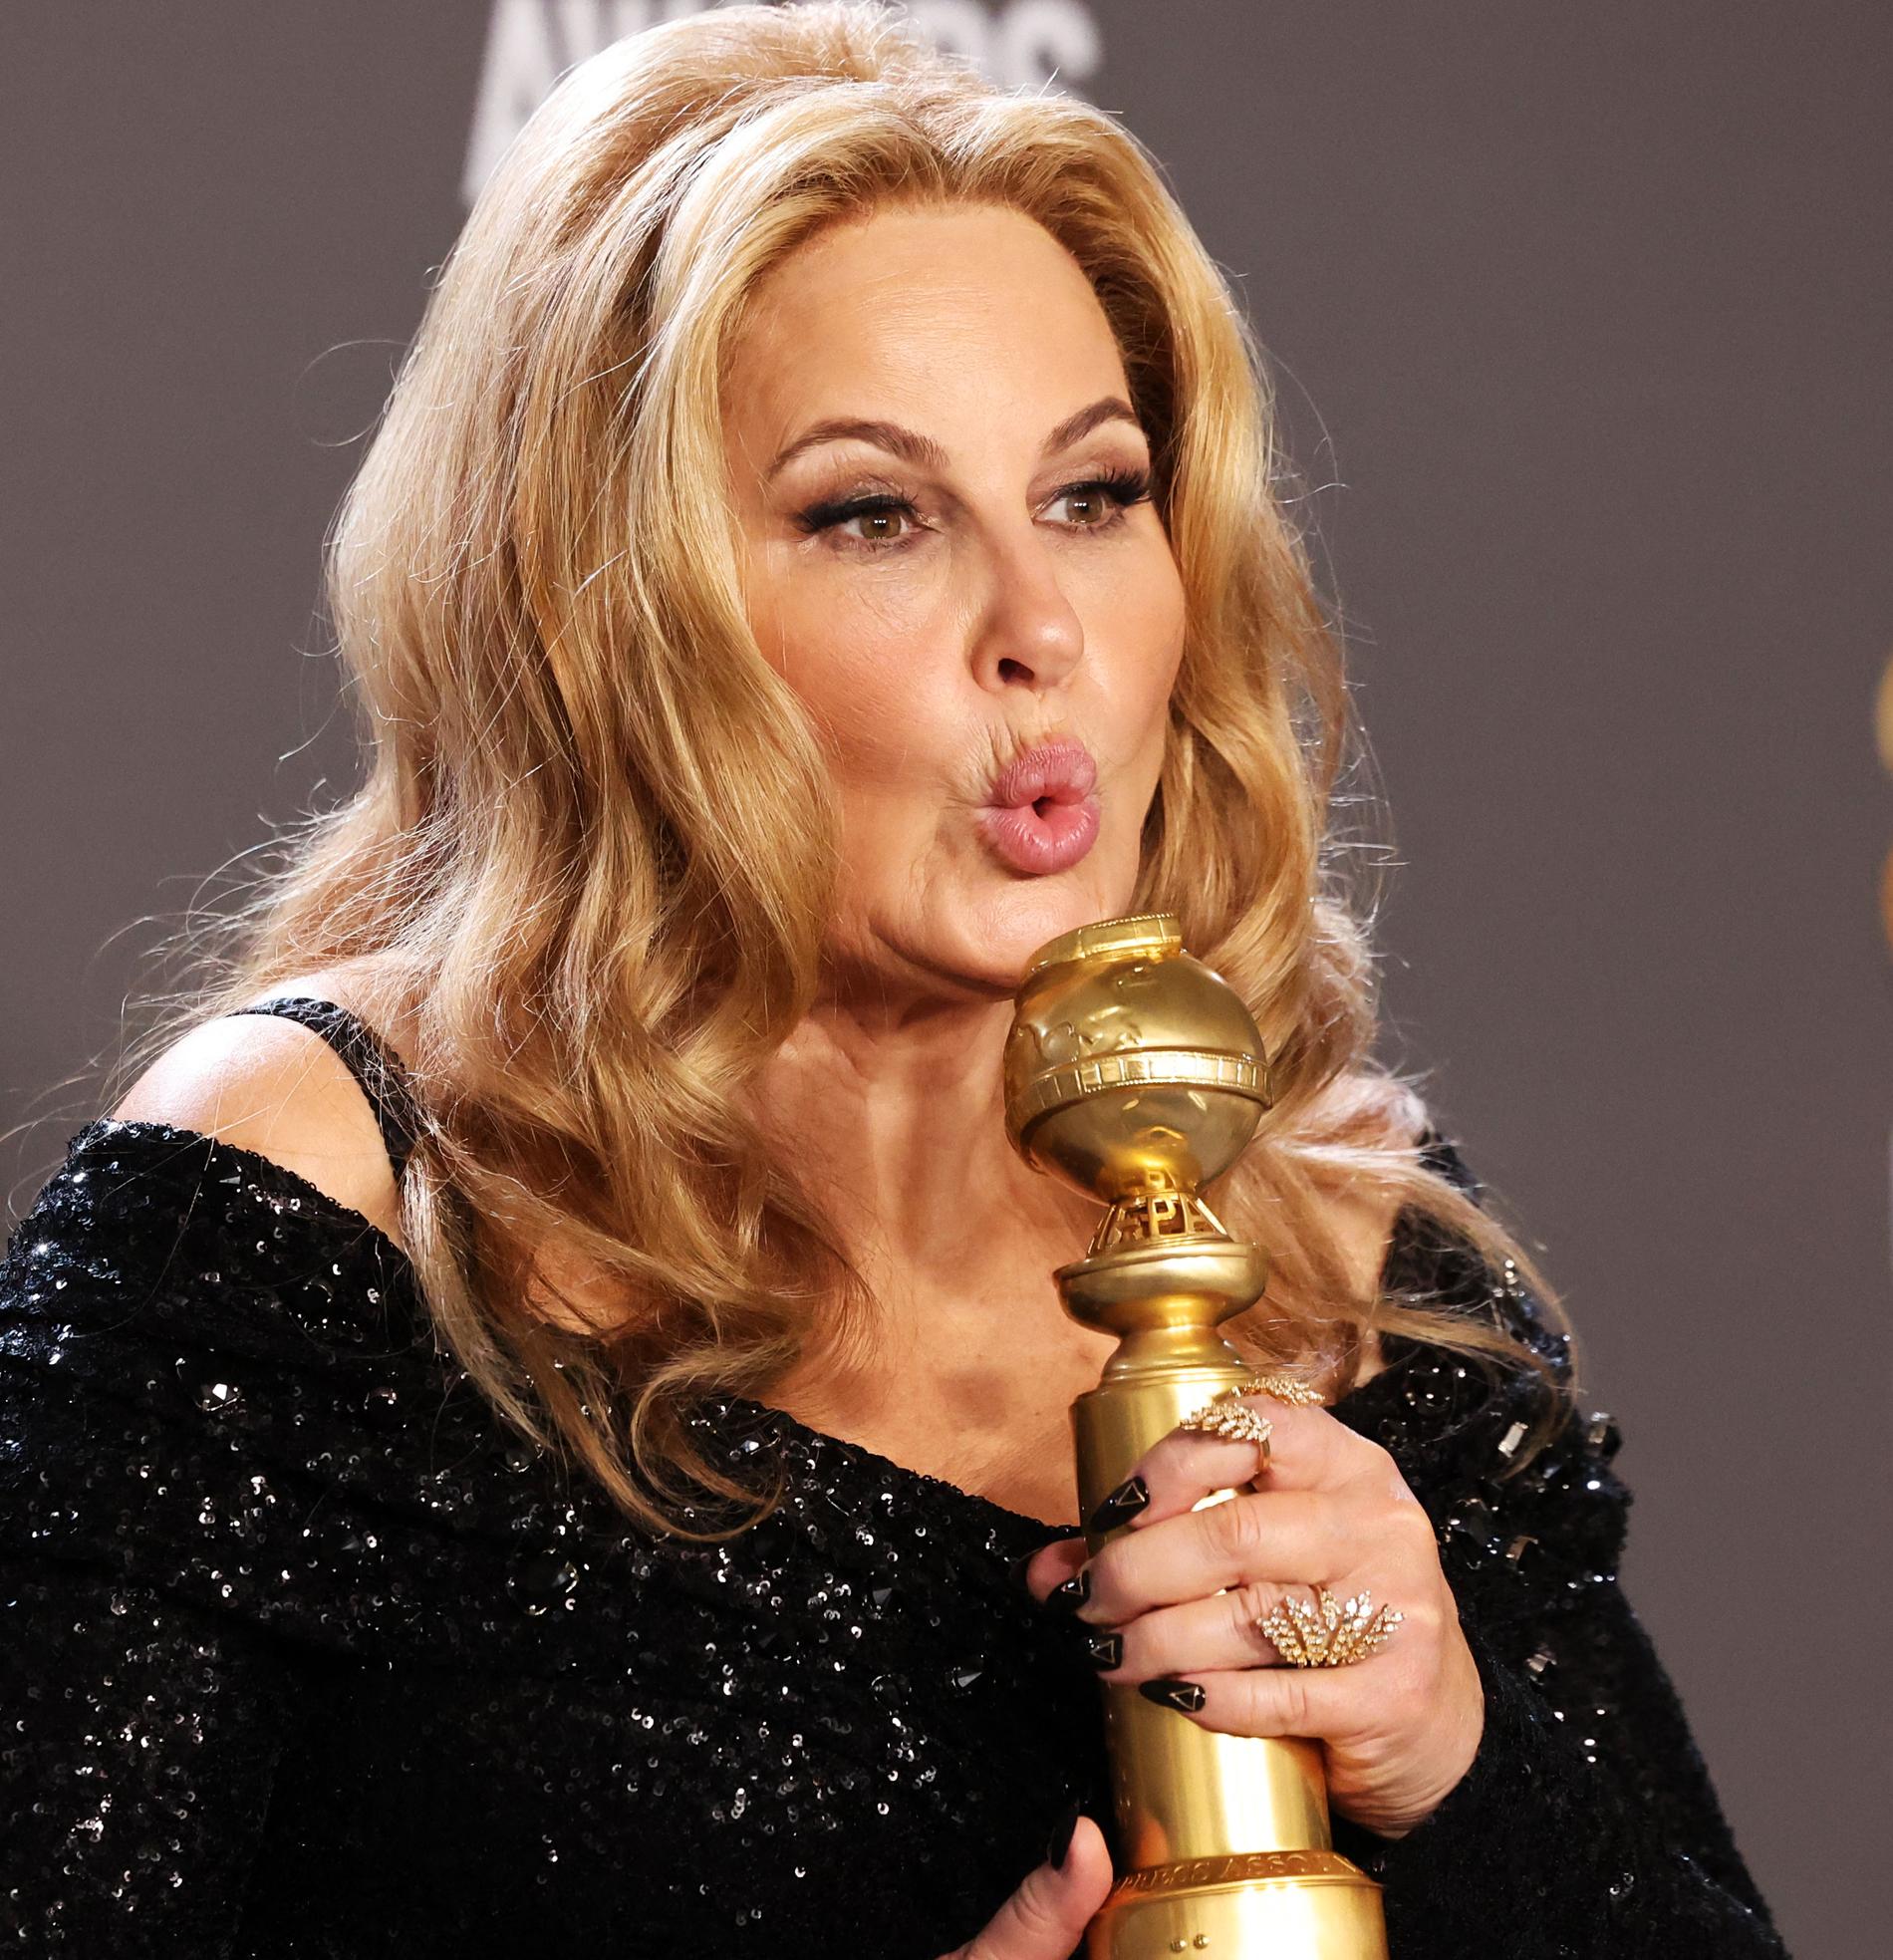 TV viewers are ecstatic over ‘The White Lotus’ star Jennifer Coolidge after the Golden Globes